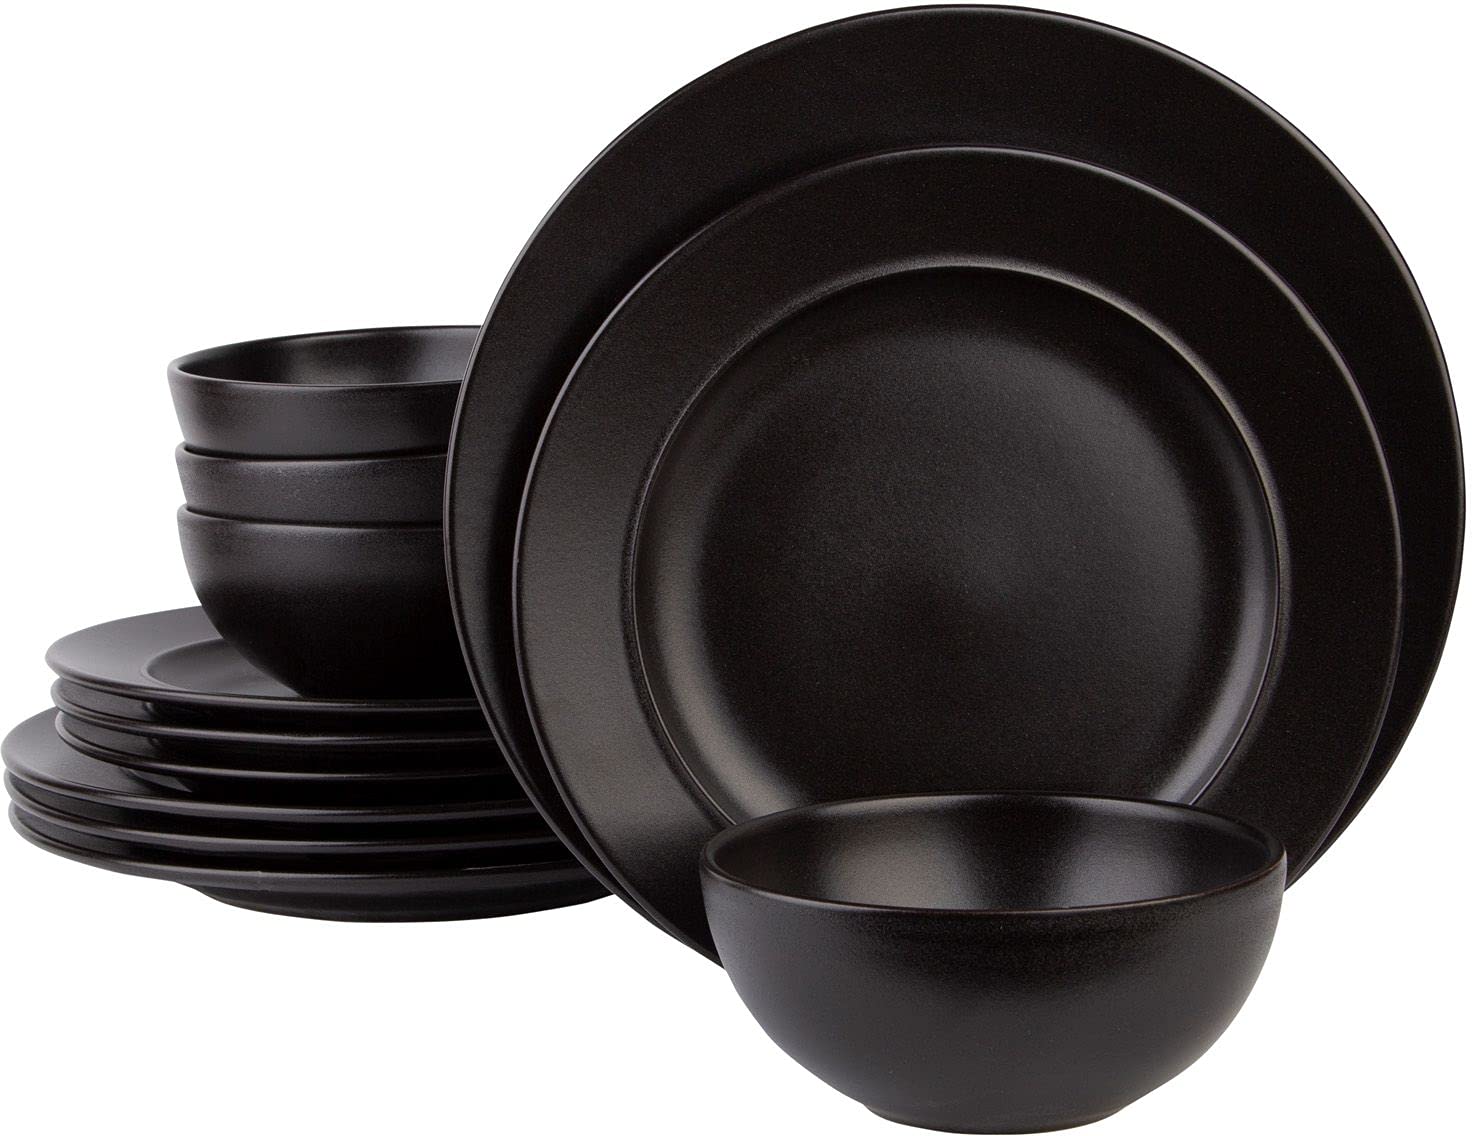 Stoneware 12 Piece Dinnerware Set By Glavers - Service For 4, Round Dishes - Made in Portugal High-End Quality. Includes 4 Dinner Plates 4 Salad Plates, And 4 Bowls.  - Like New